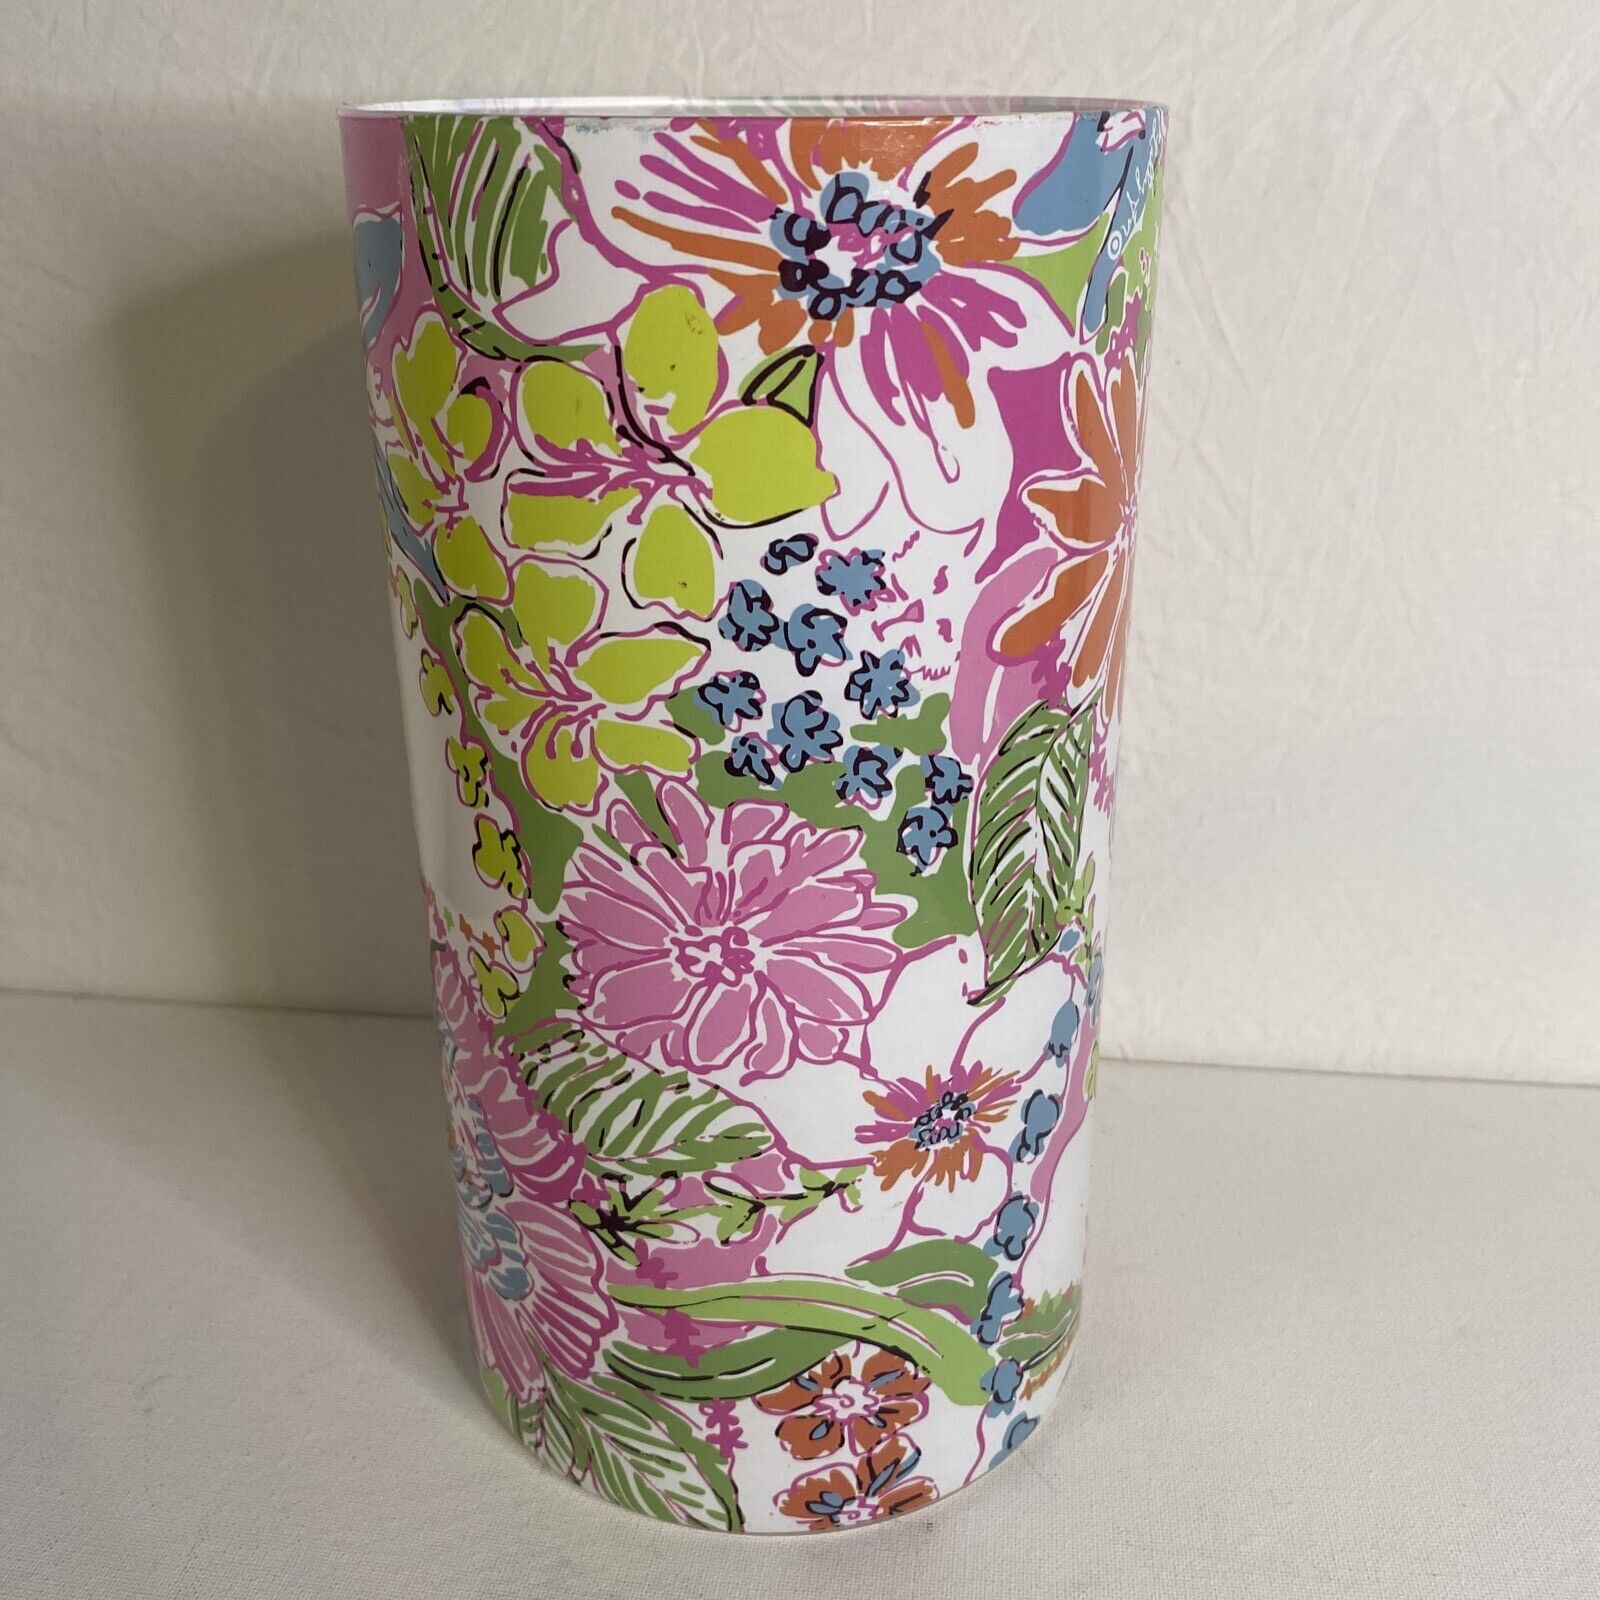 Lilly Pulitzer Vase From Target. Floral, Pink, Blue Green And Orange . Round 10”